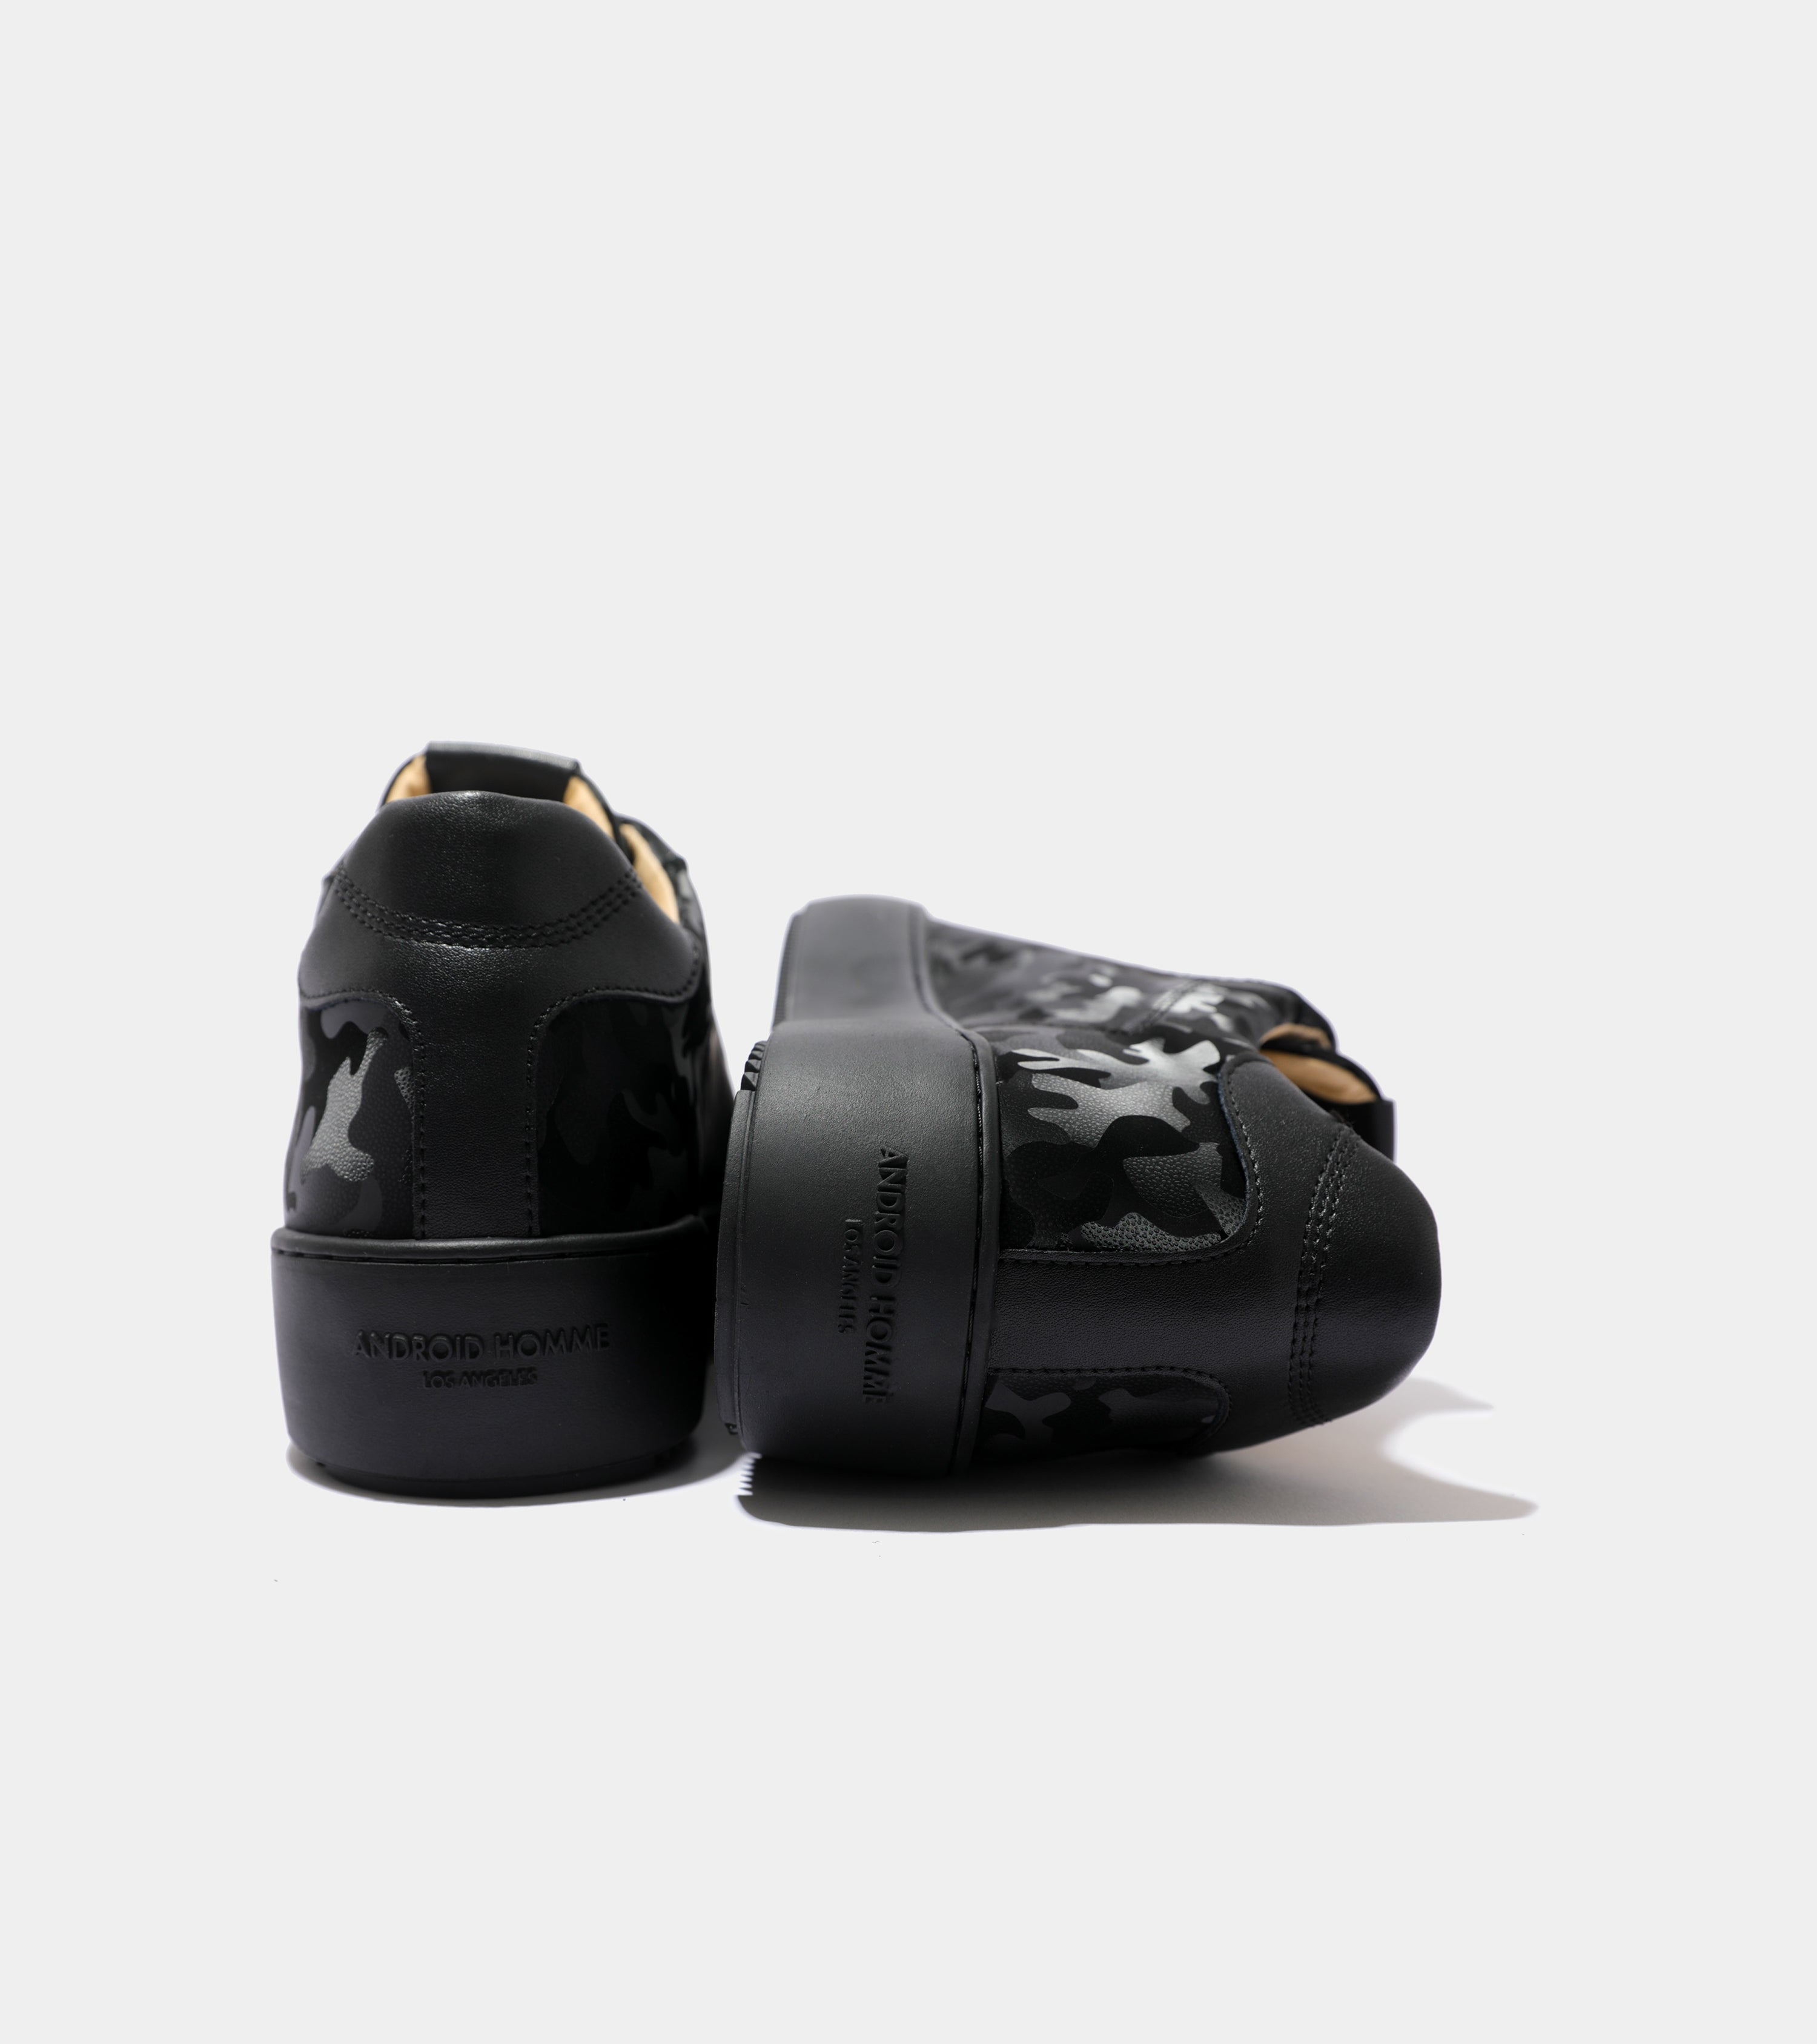 Ecom imagery of the Zuma All Over Black Leather Camo Android Homme Trainers.